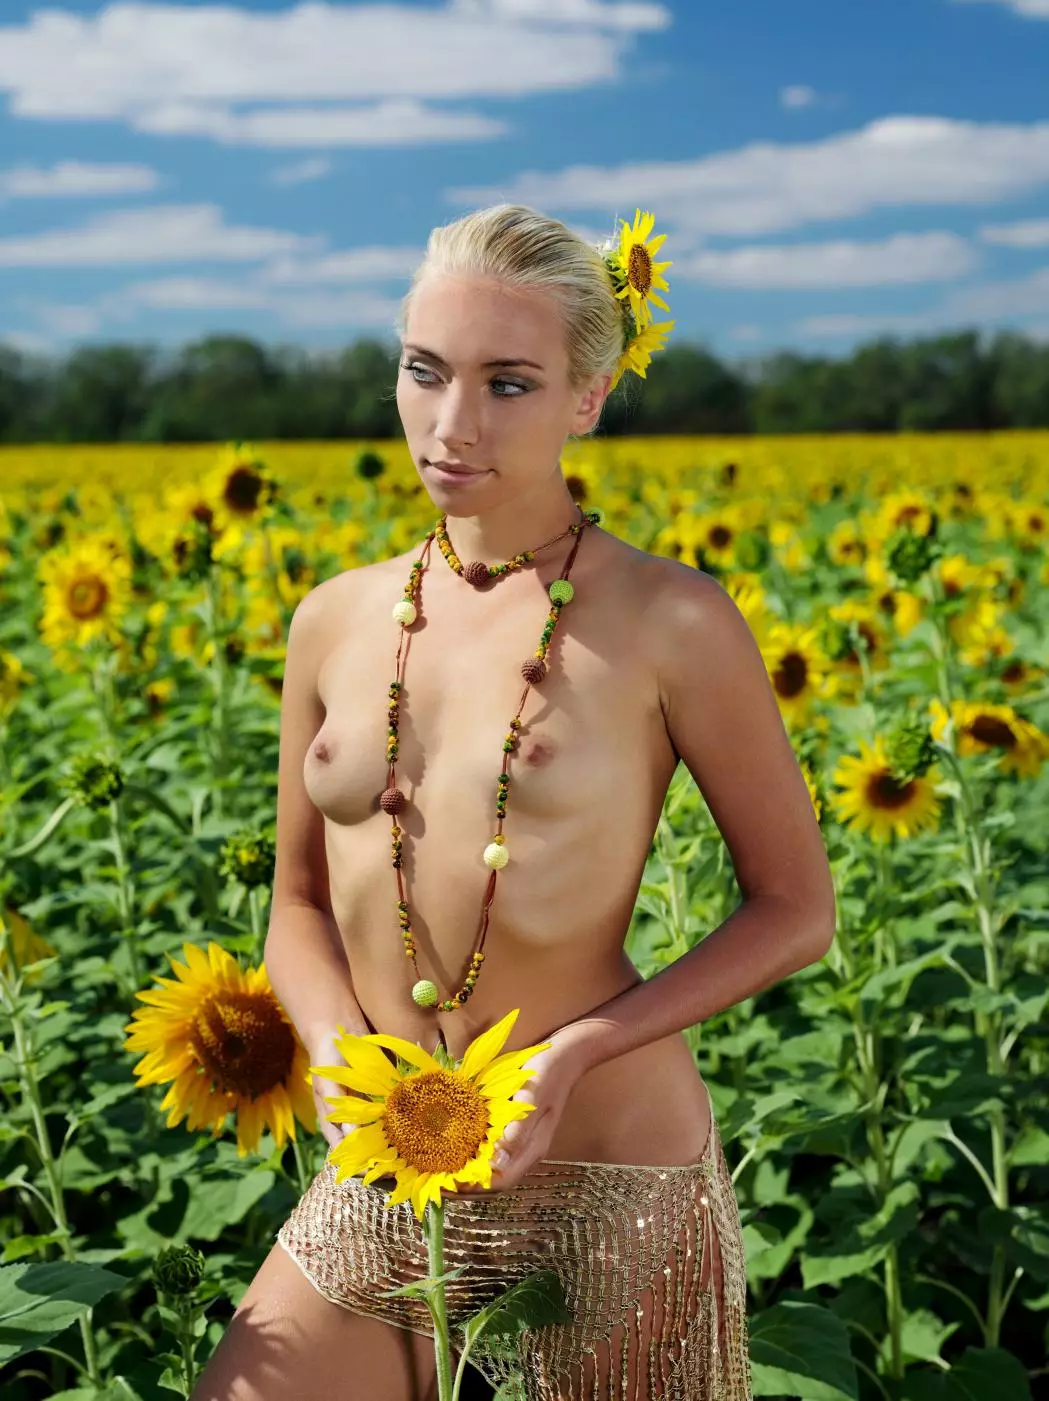 Charming blonde babe Adele B is naked in the middle of the sun flower field